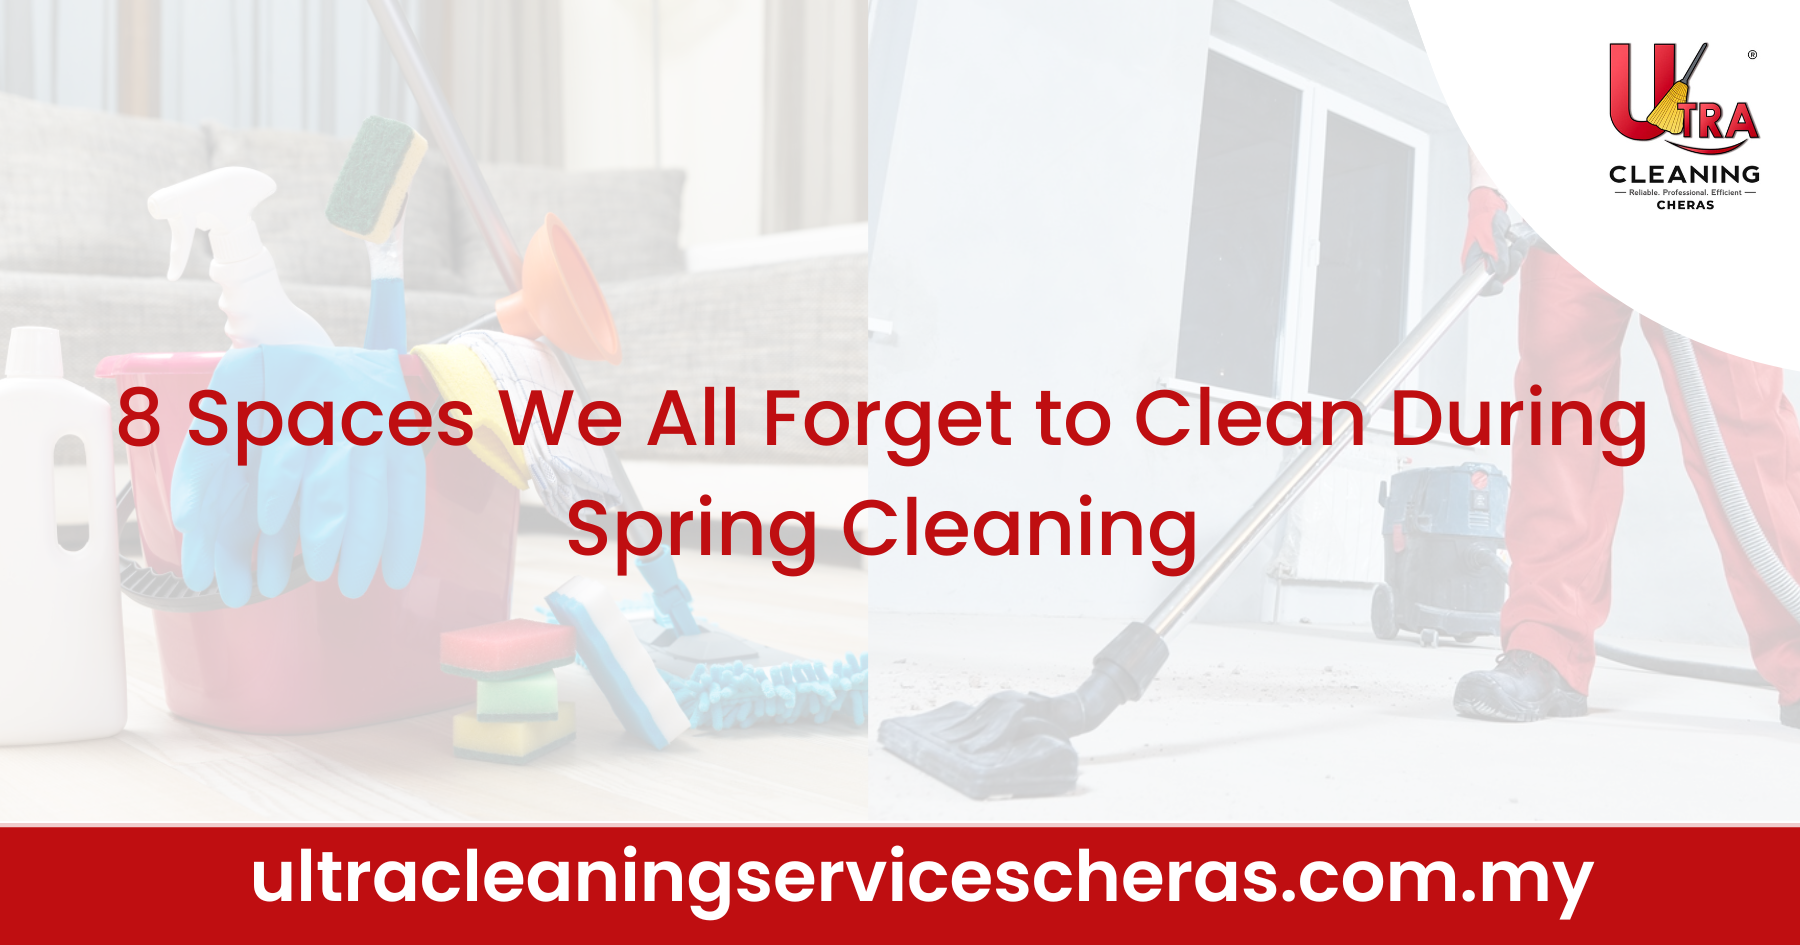 8 Spaces We All Forget to Clean During Spring Cleaning